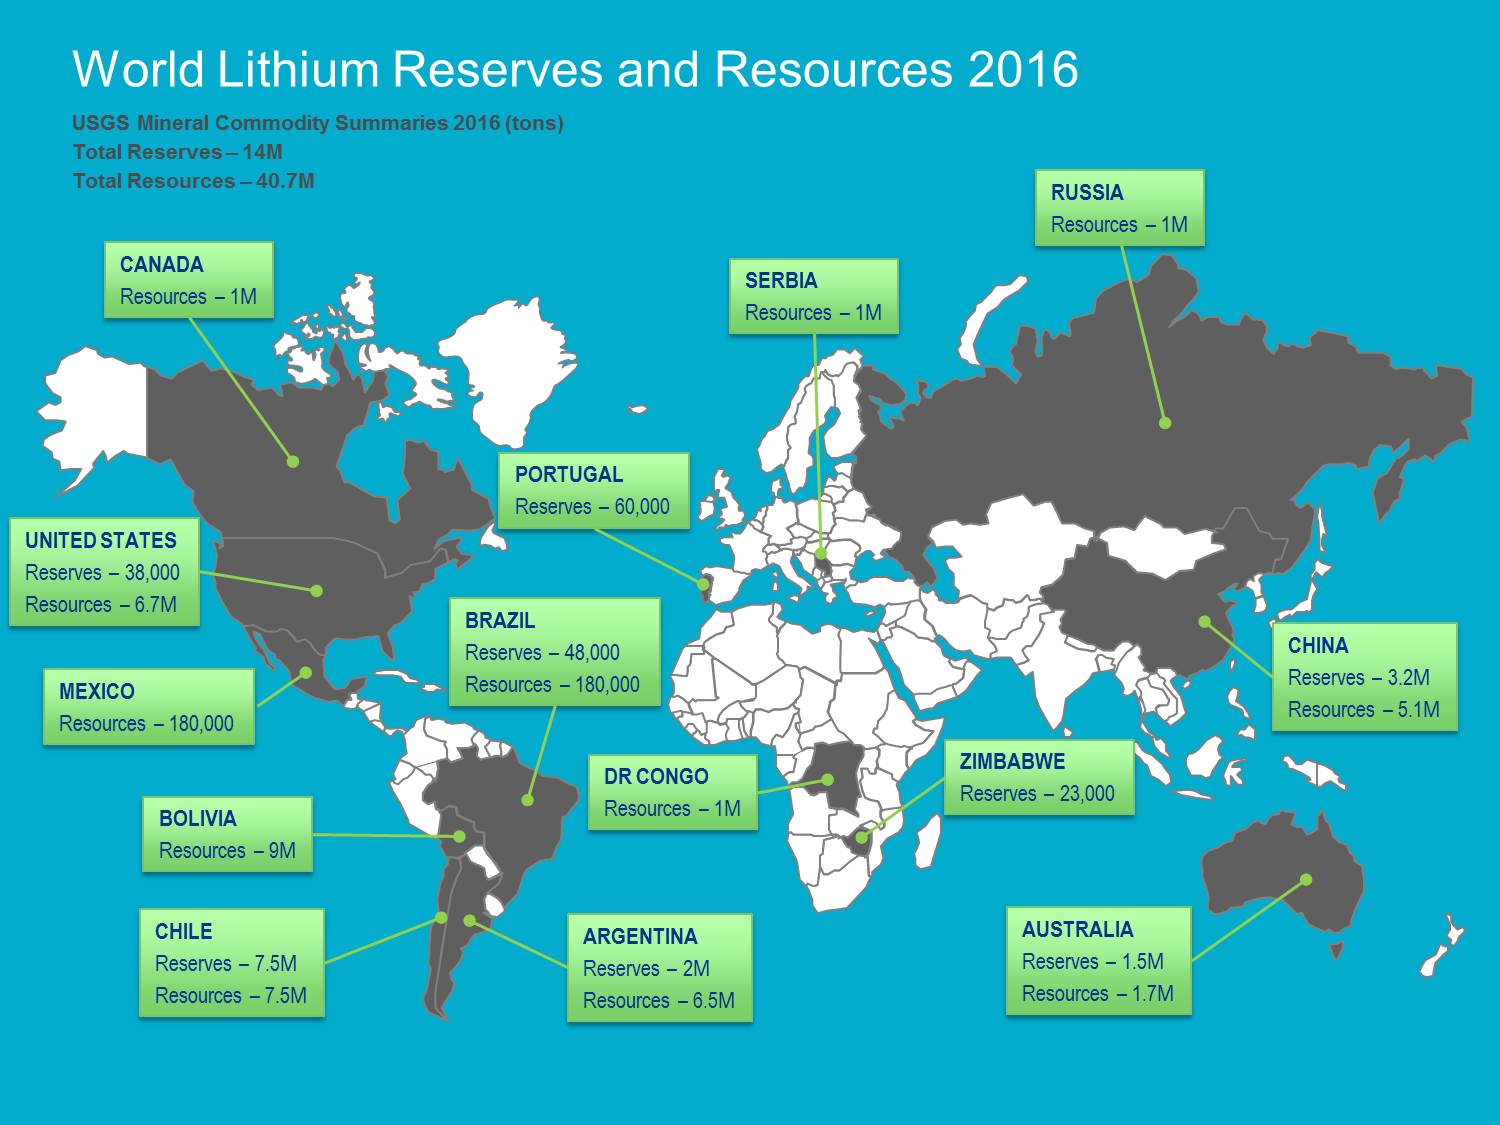 Top ten biggest lithium mines in the world based on reserves